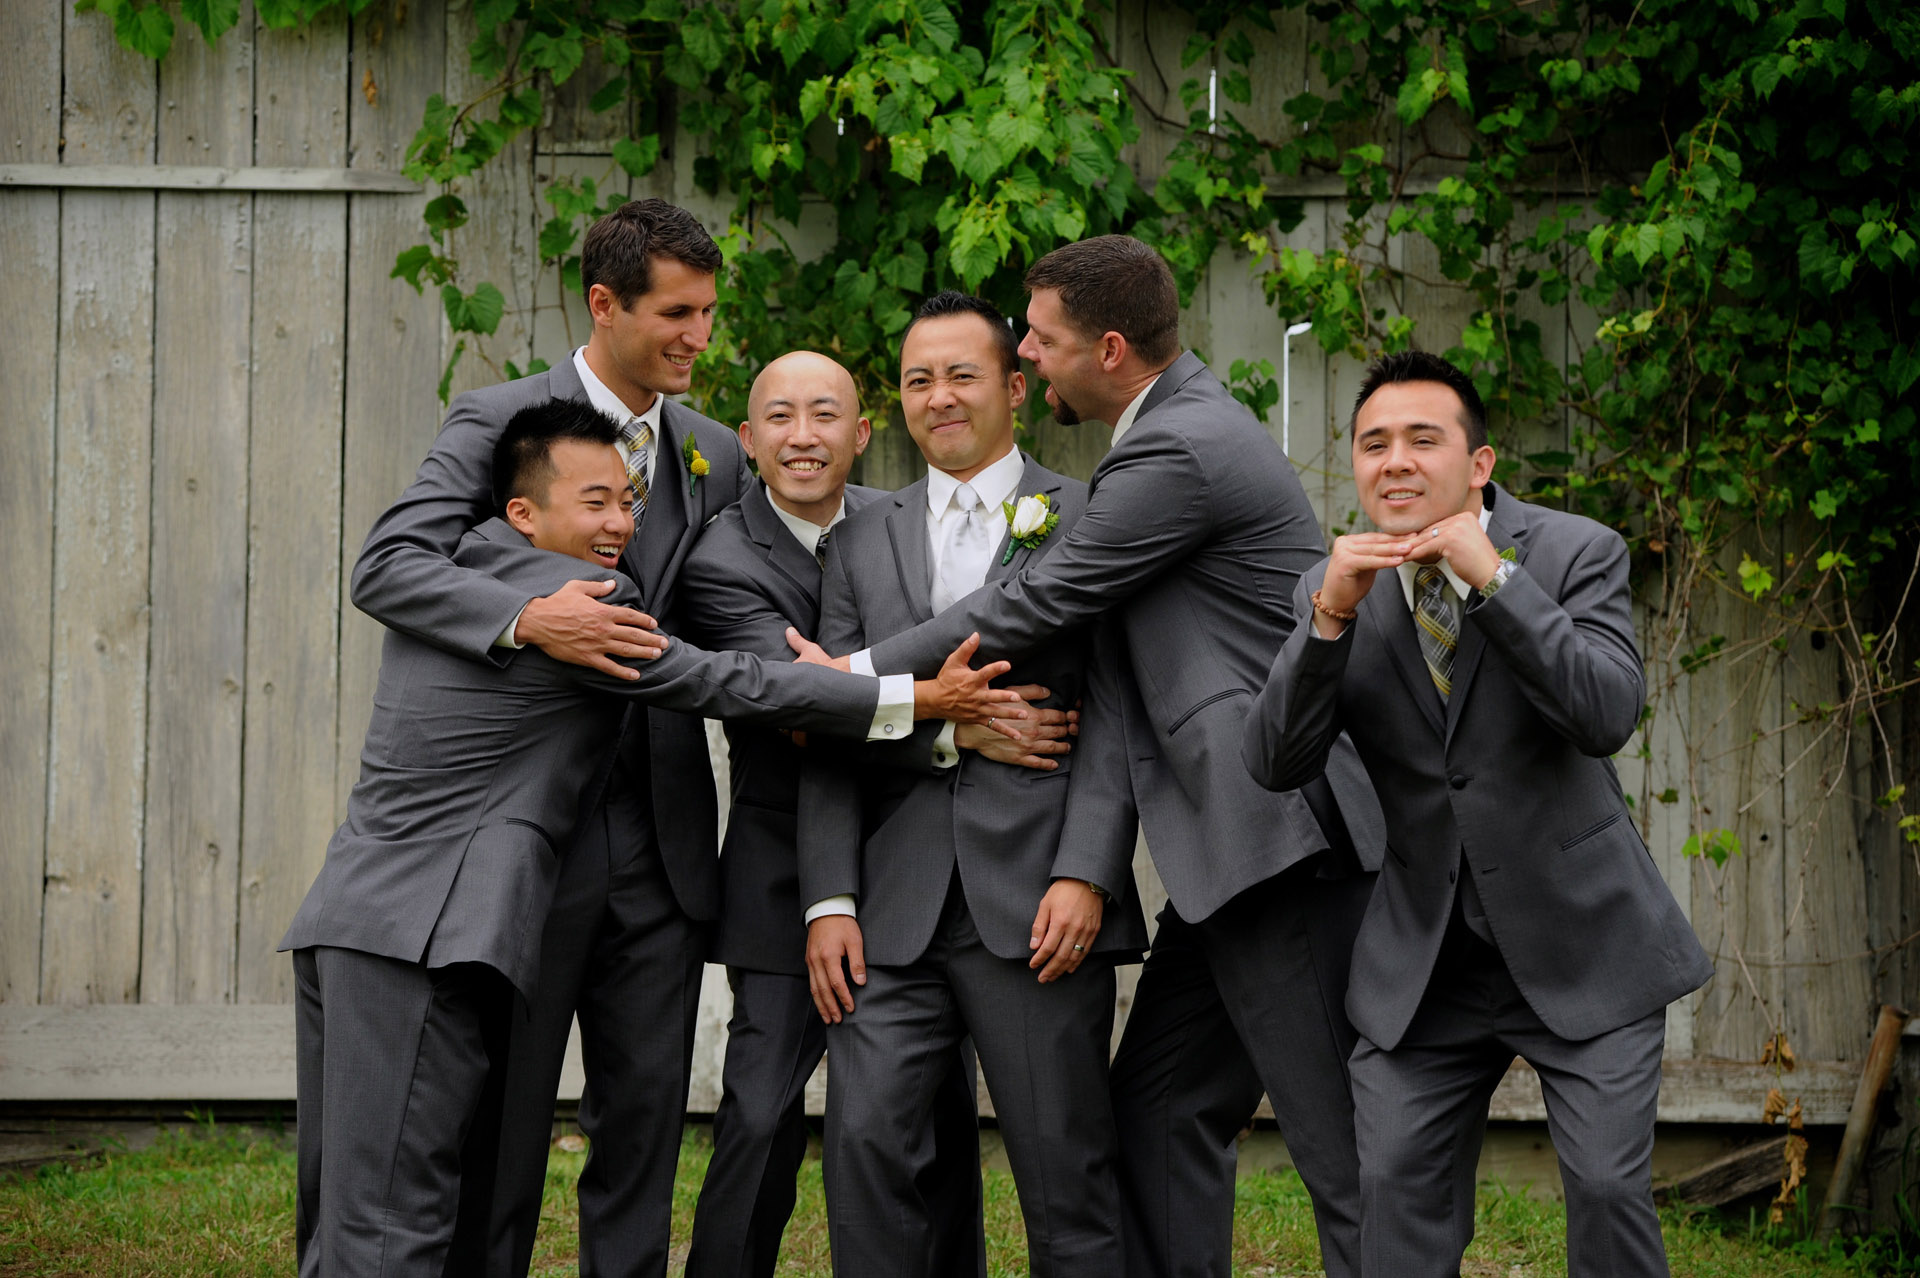 Pine Trace Golf Club wedding photographer's photo of the groom and groomsmen goofing off before their Troy , Michigan wedding.